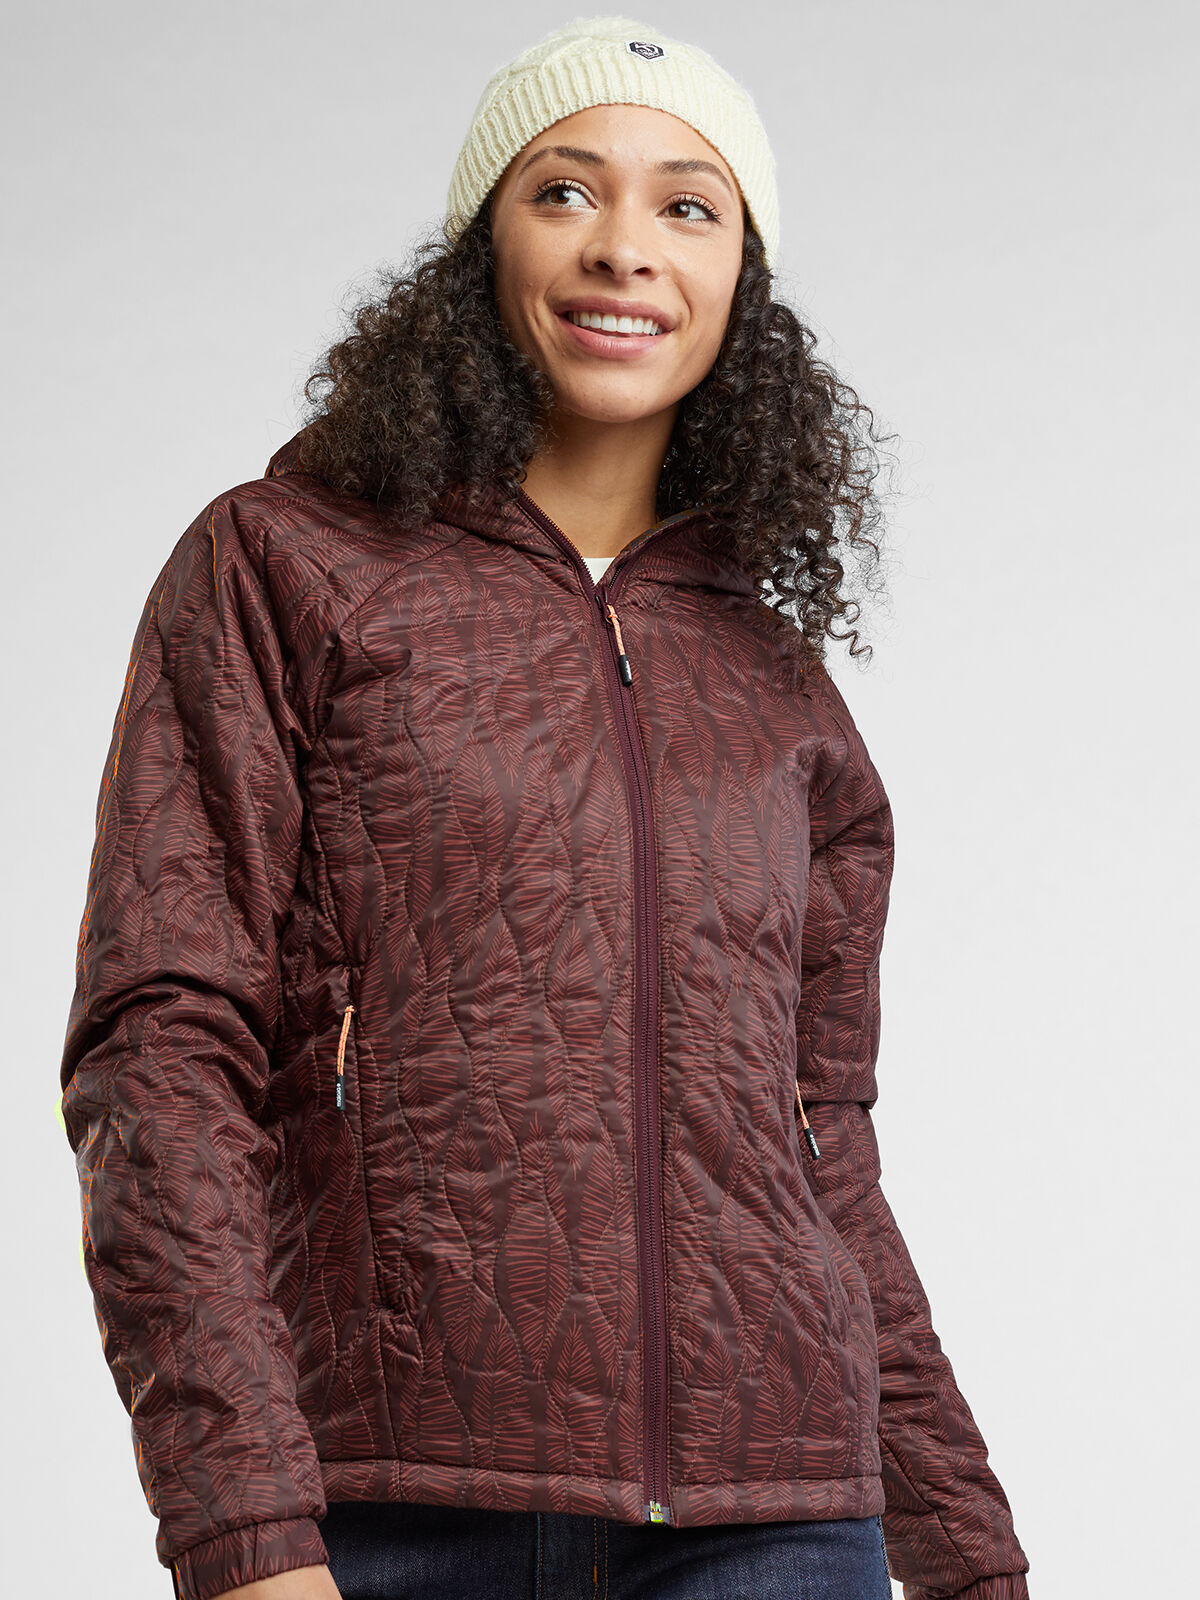 Women's Riley Insulated Jacket | Eddie Bauer Outlet